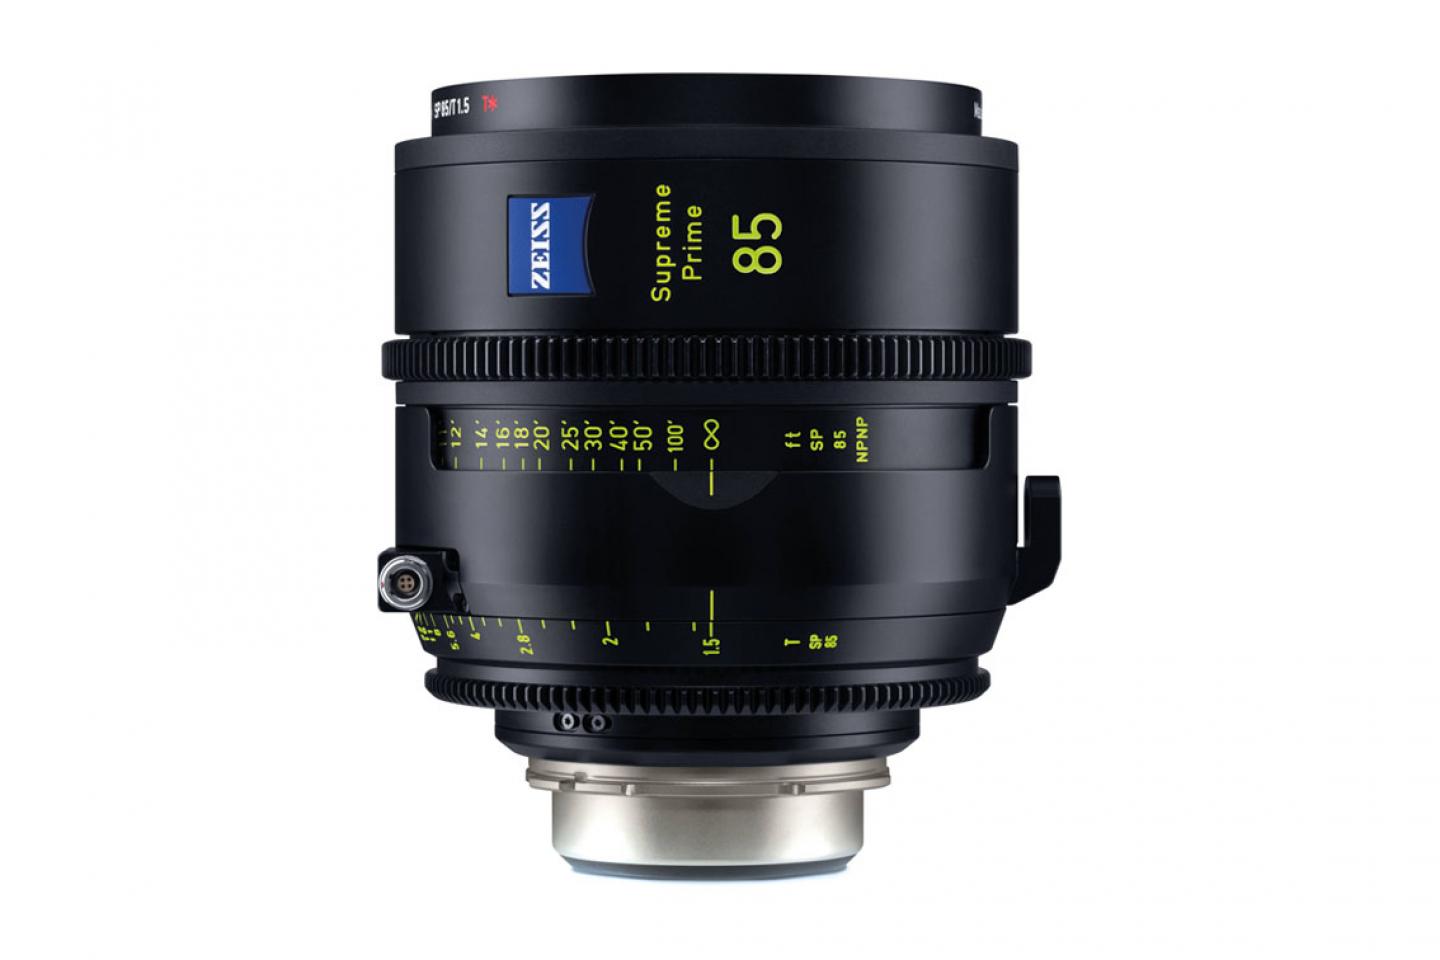 Carl Zeiss Supreme Prime 85mm T1.5